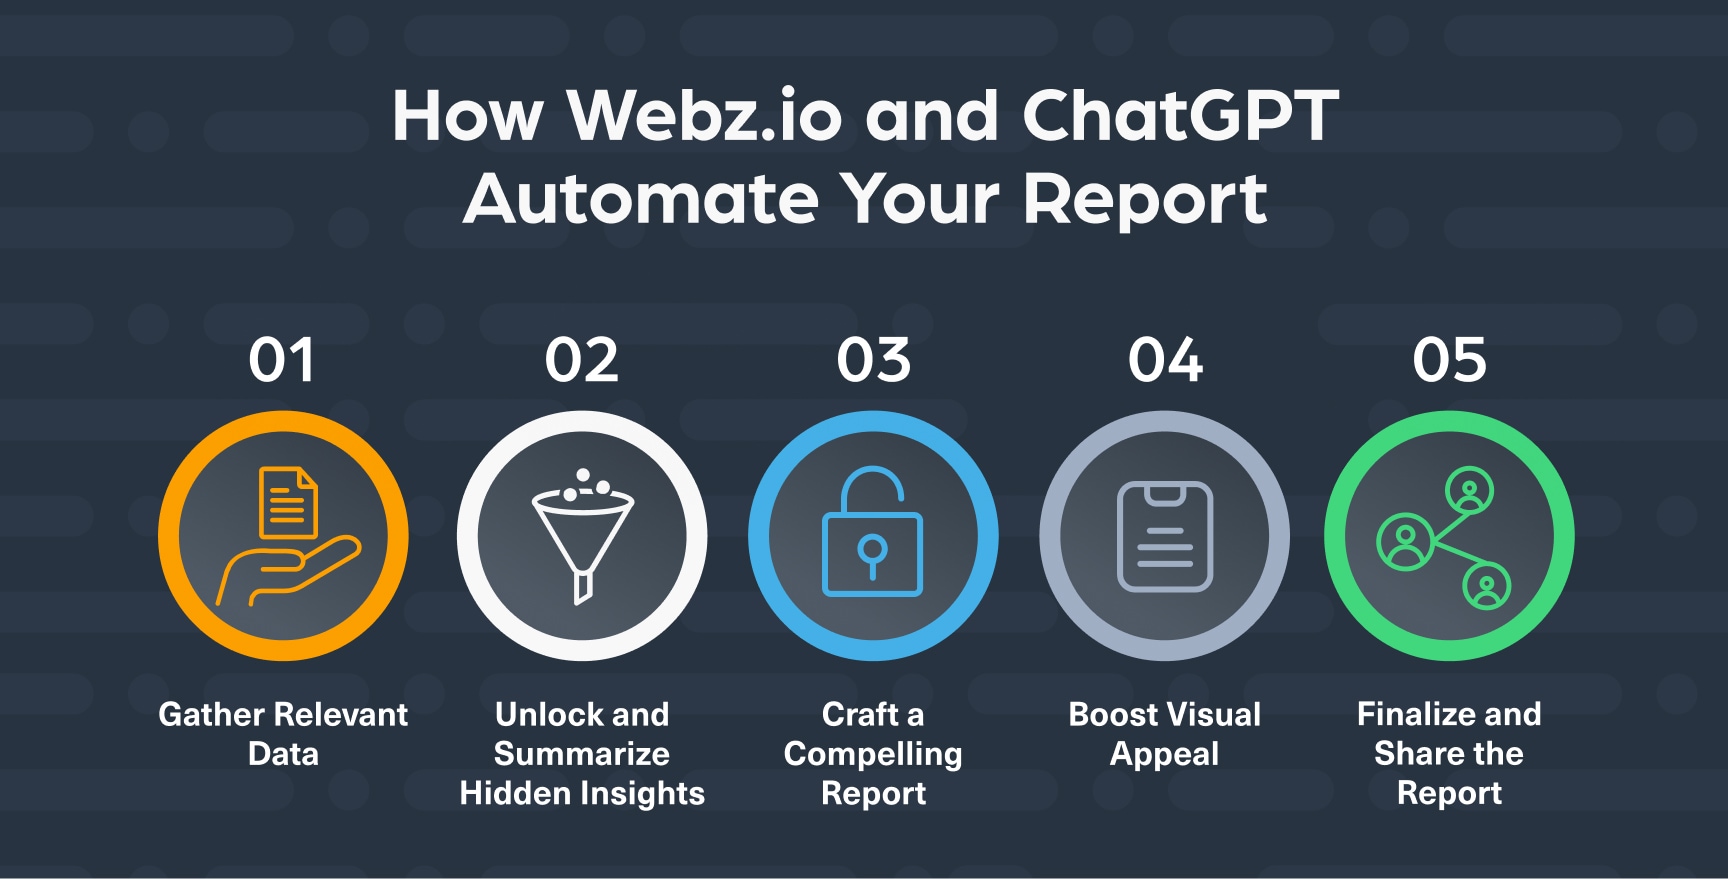 How Webz.io and Chat GPT can help you automate your supply chain risk reports